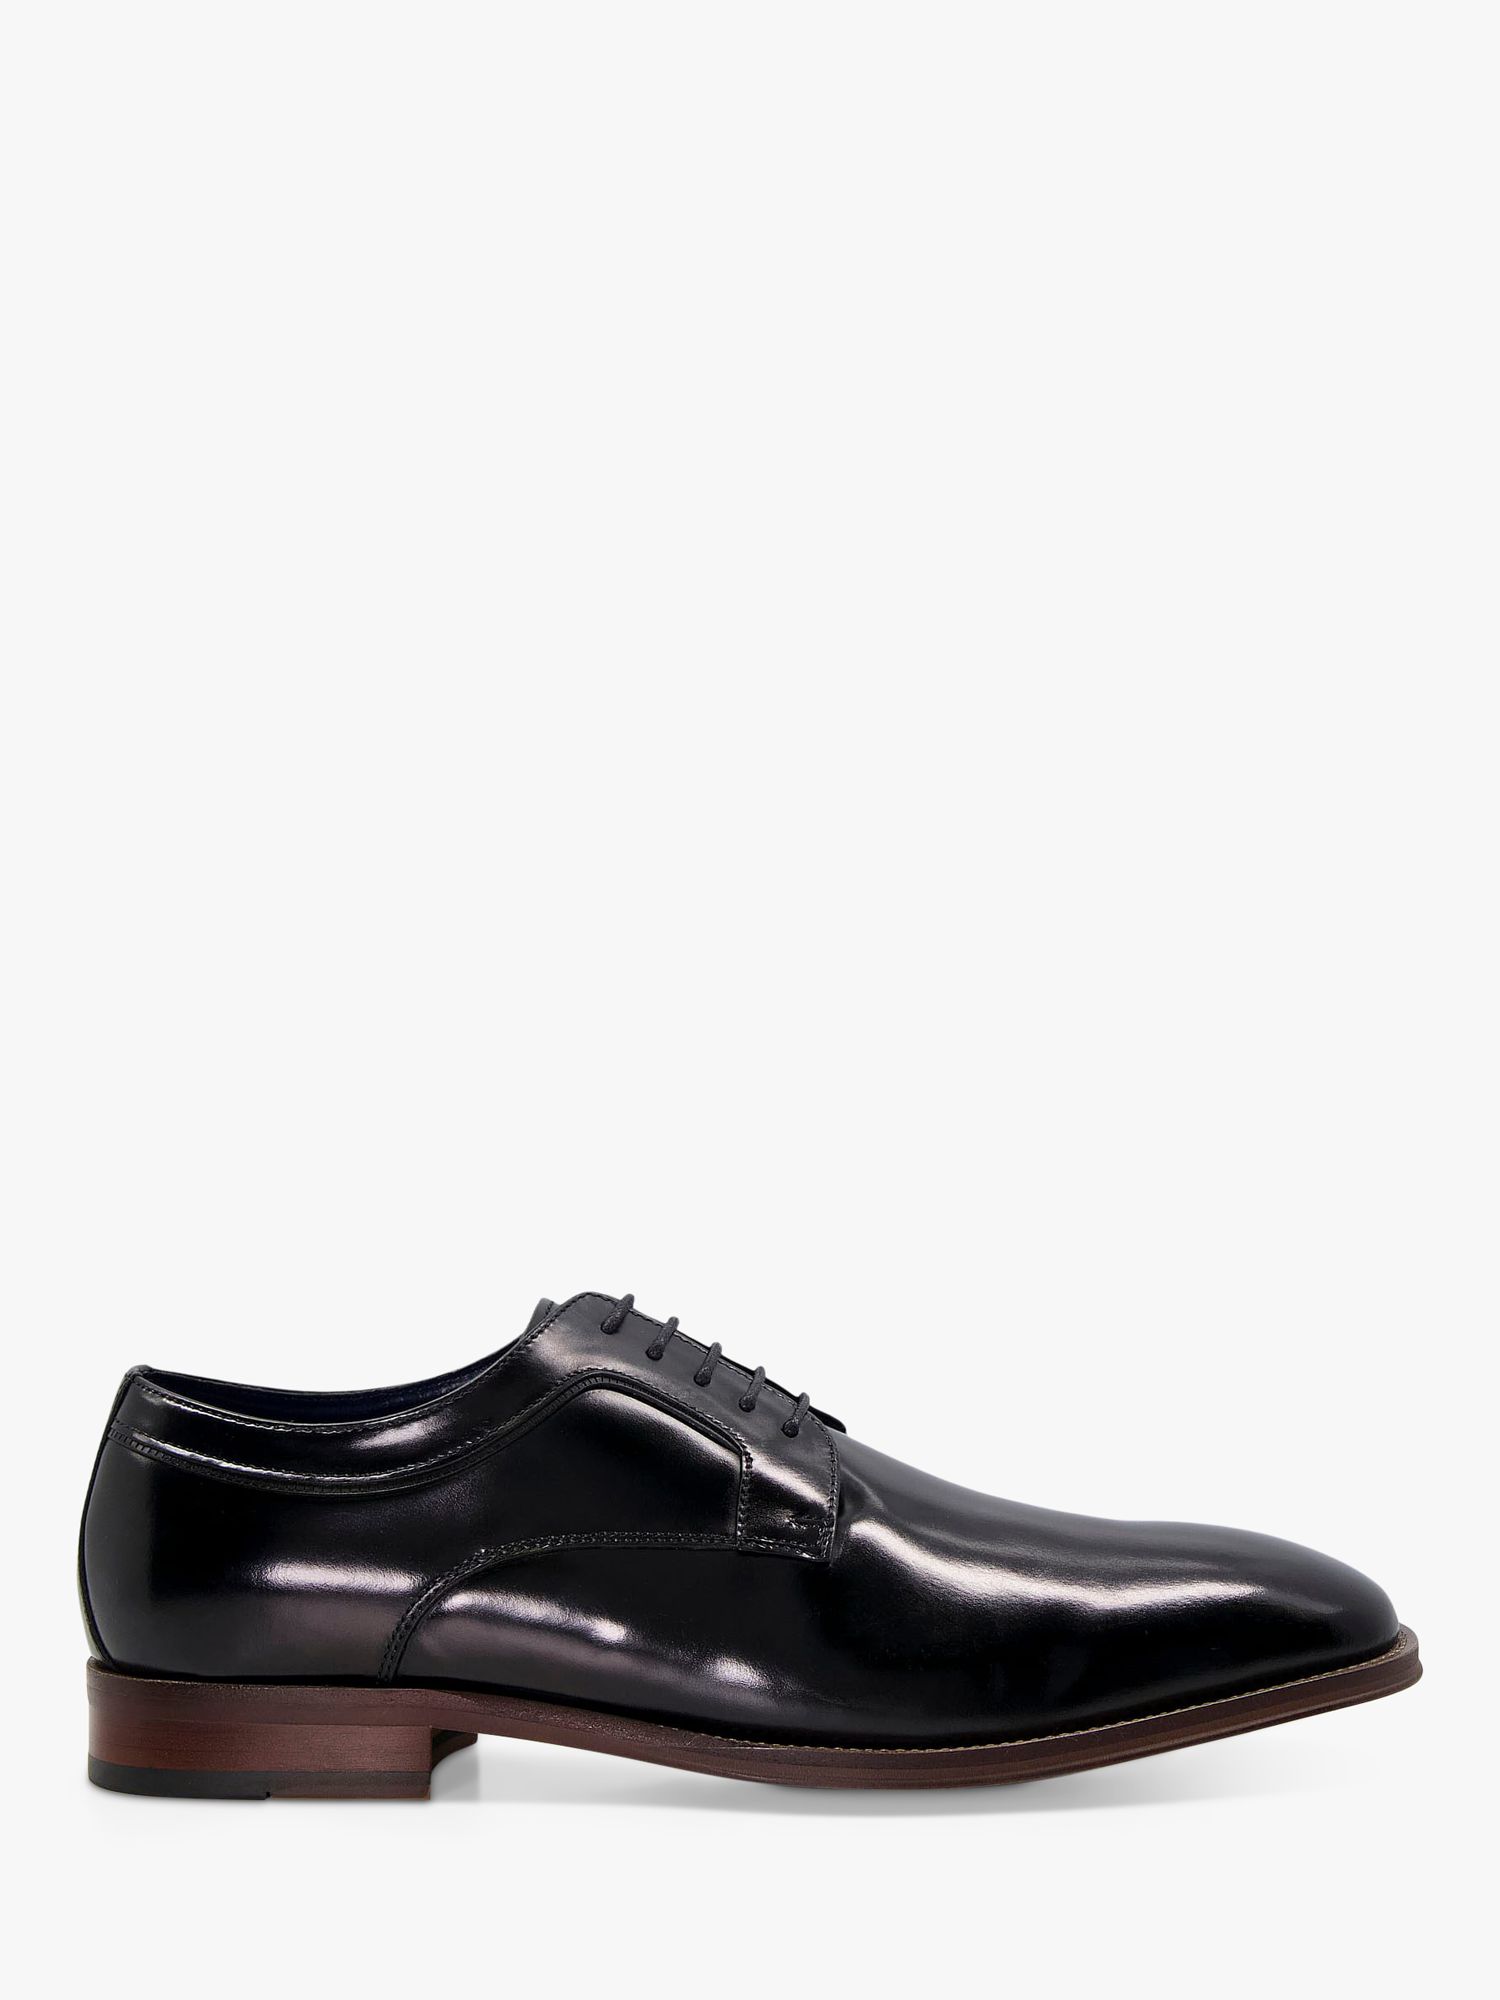 Dune Sparrows Wide Fit Leather Gibson Shoes, Black-leather